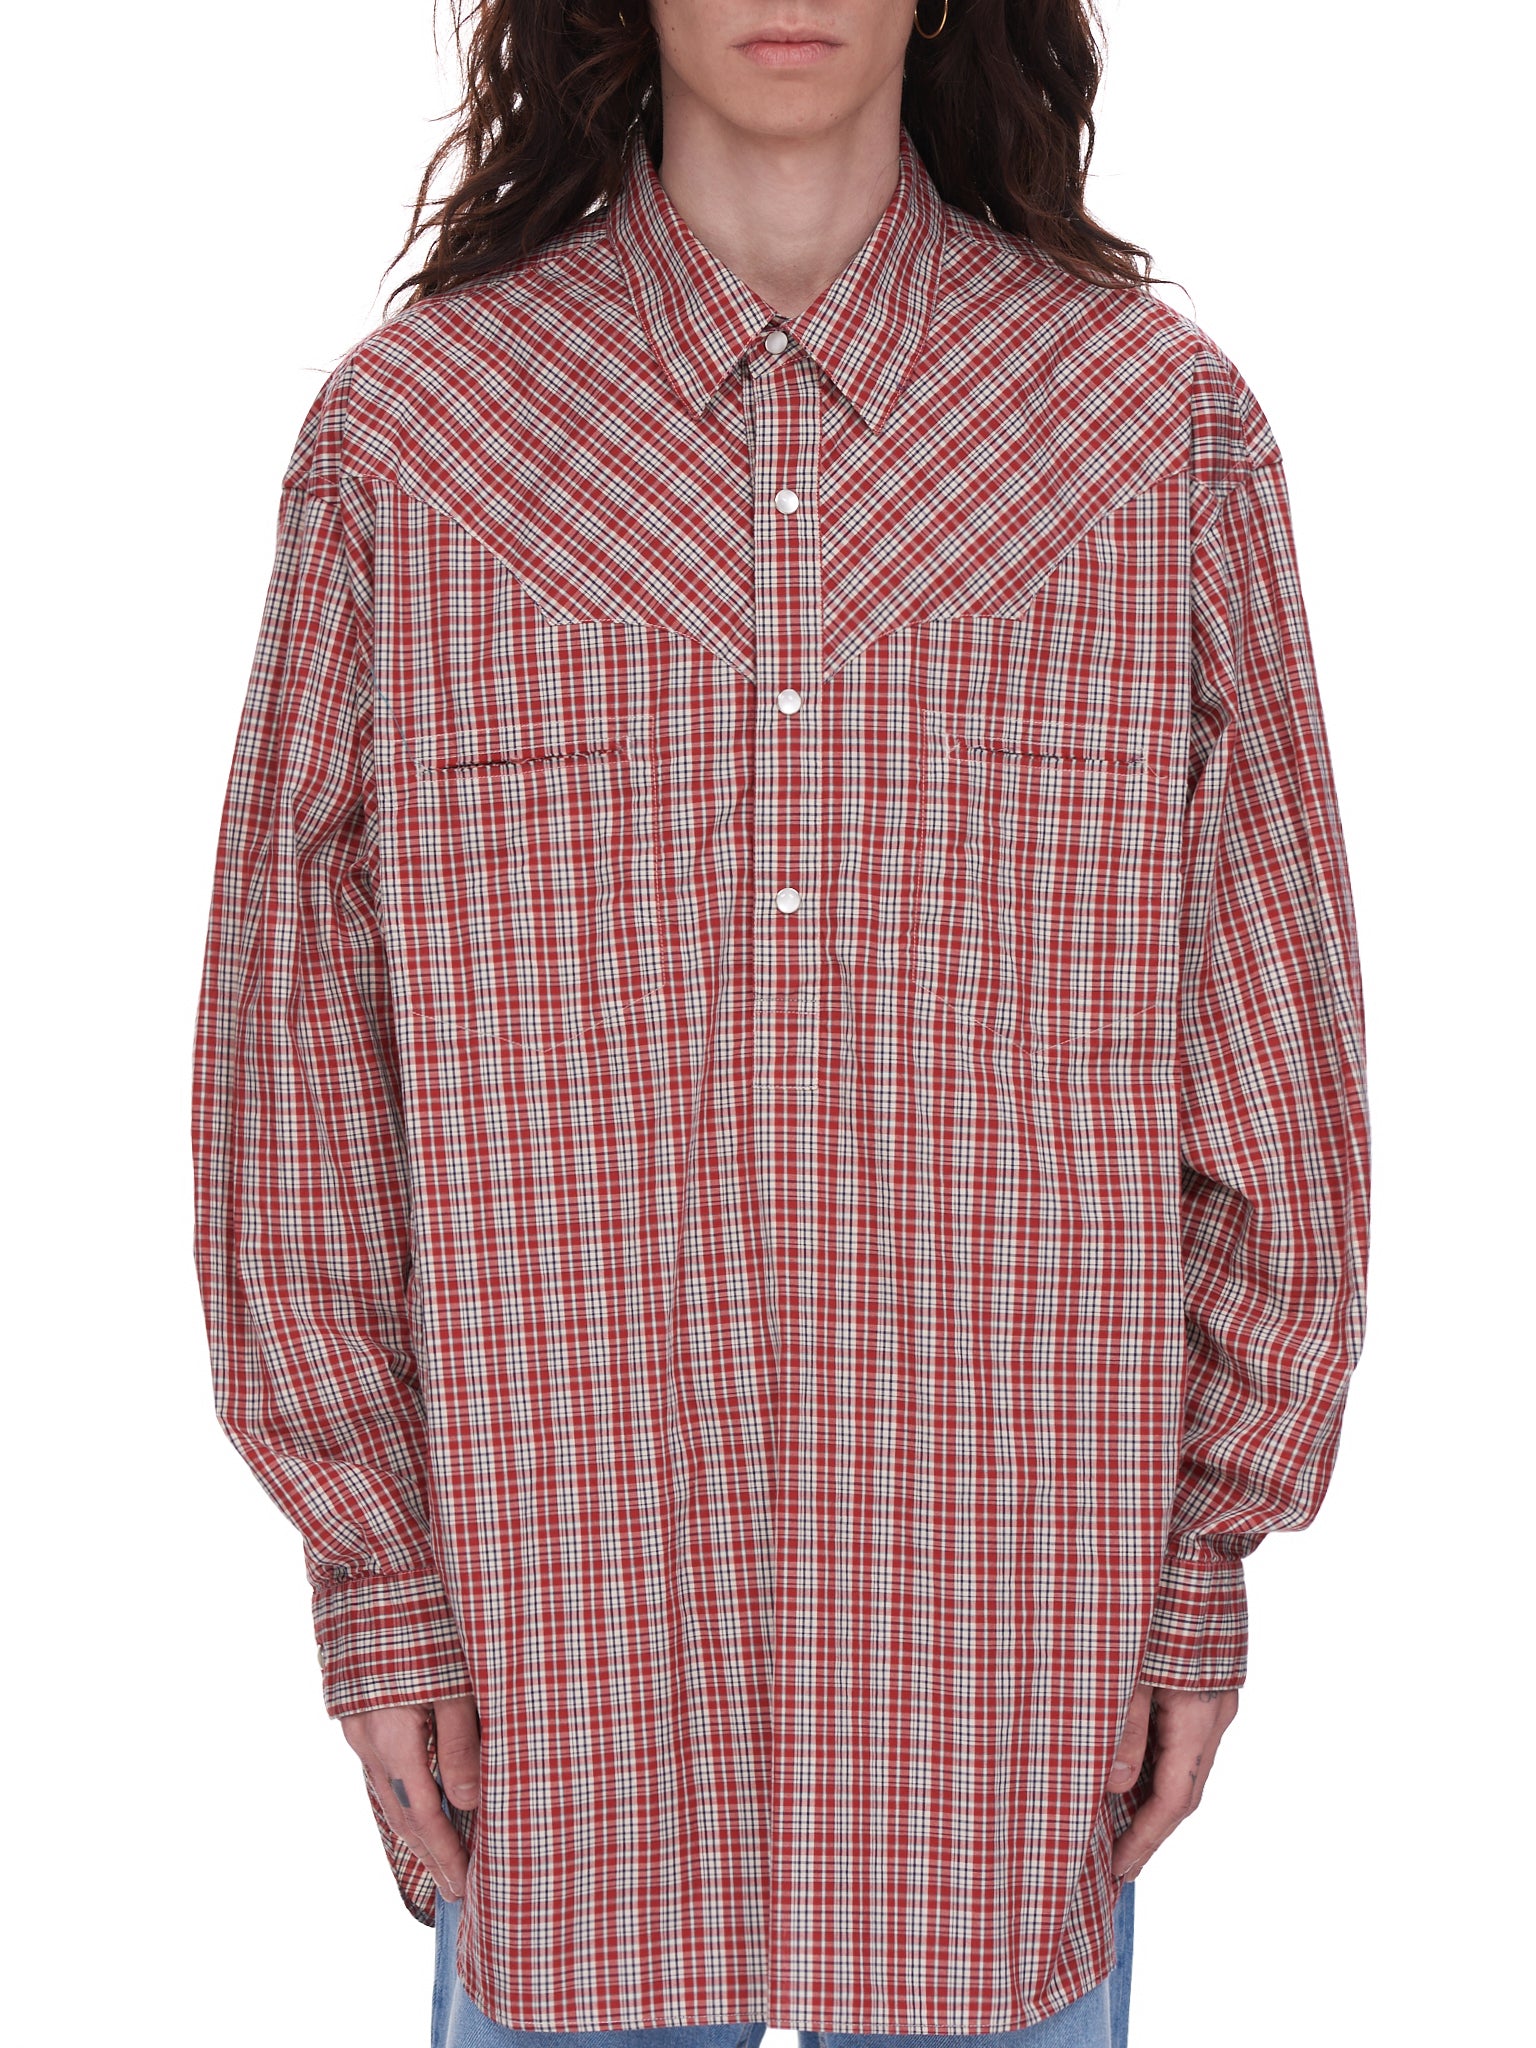 Undercover Plaid Top | H. Lorenzo - front